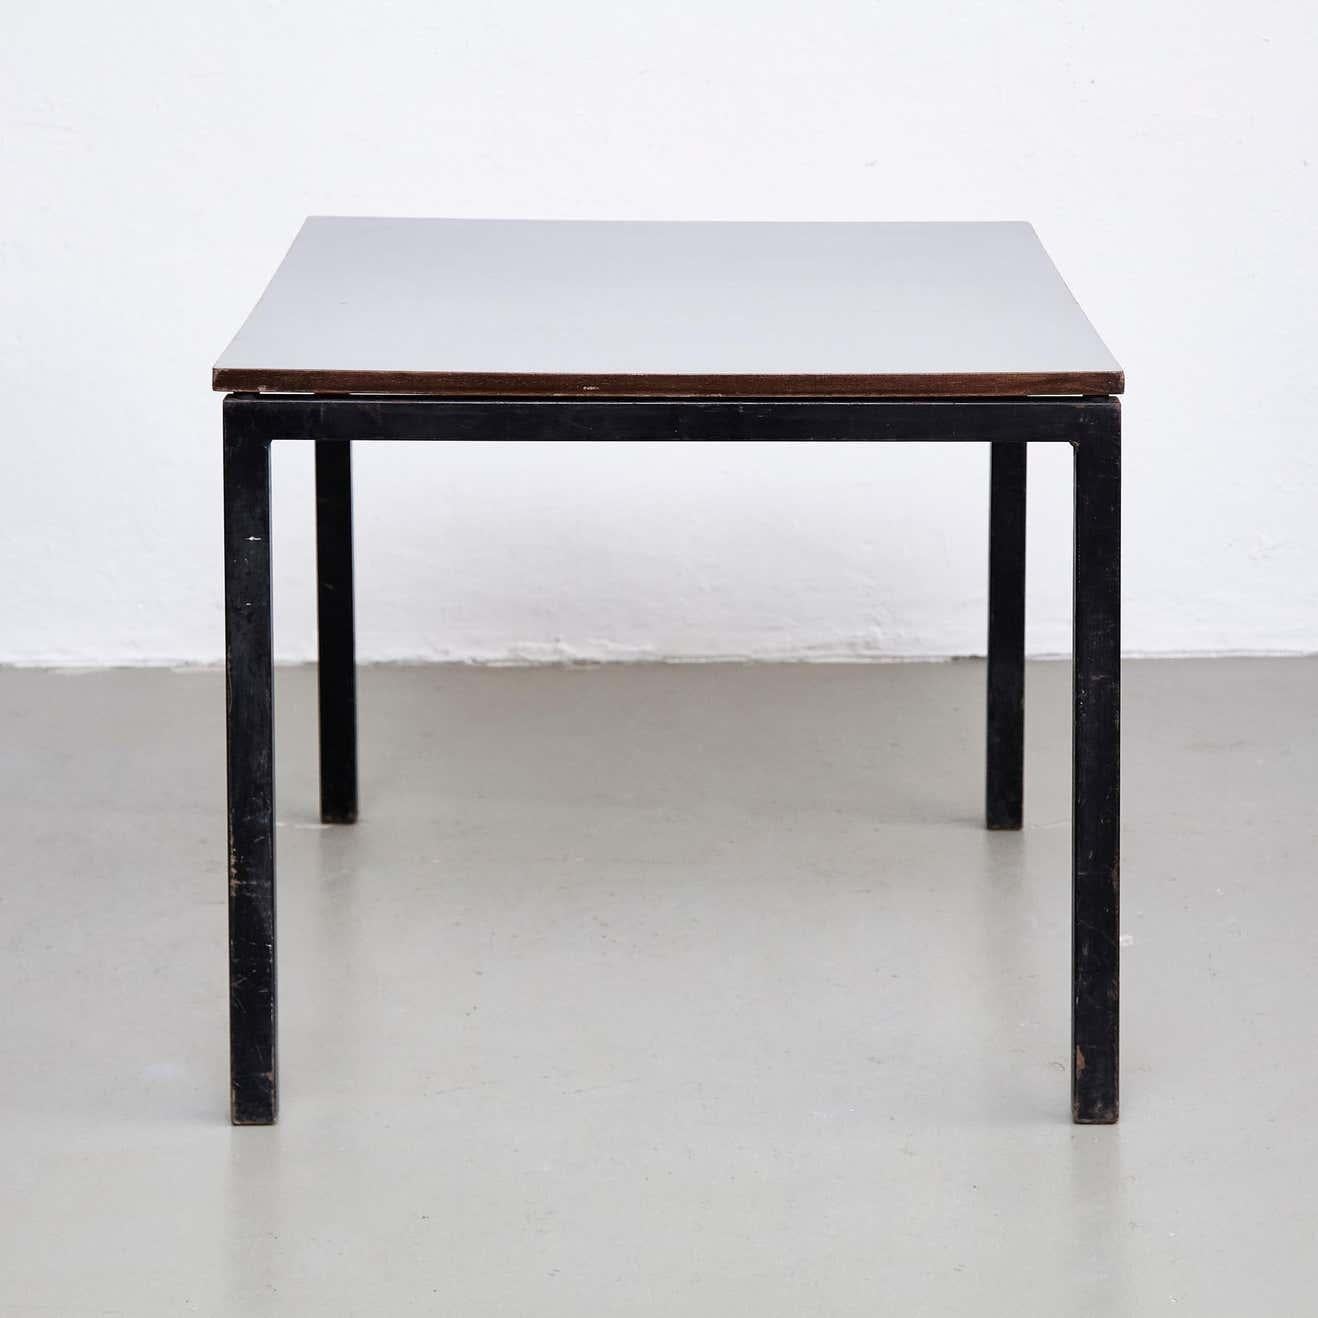 French Charlotte Perriand, Mid-Century Modern, Wood Formica and Metal Table, circa 1950 For Sale